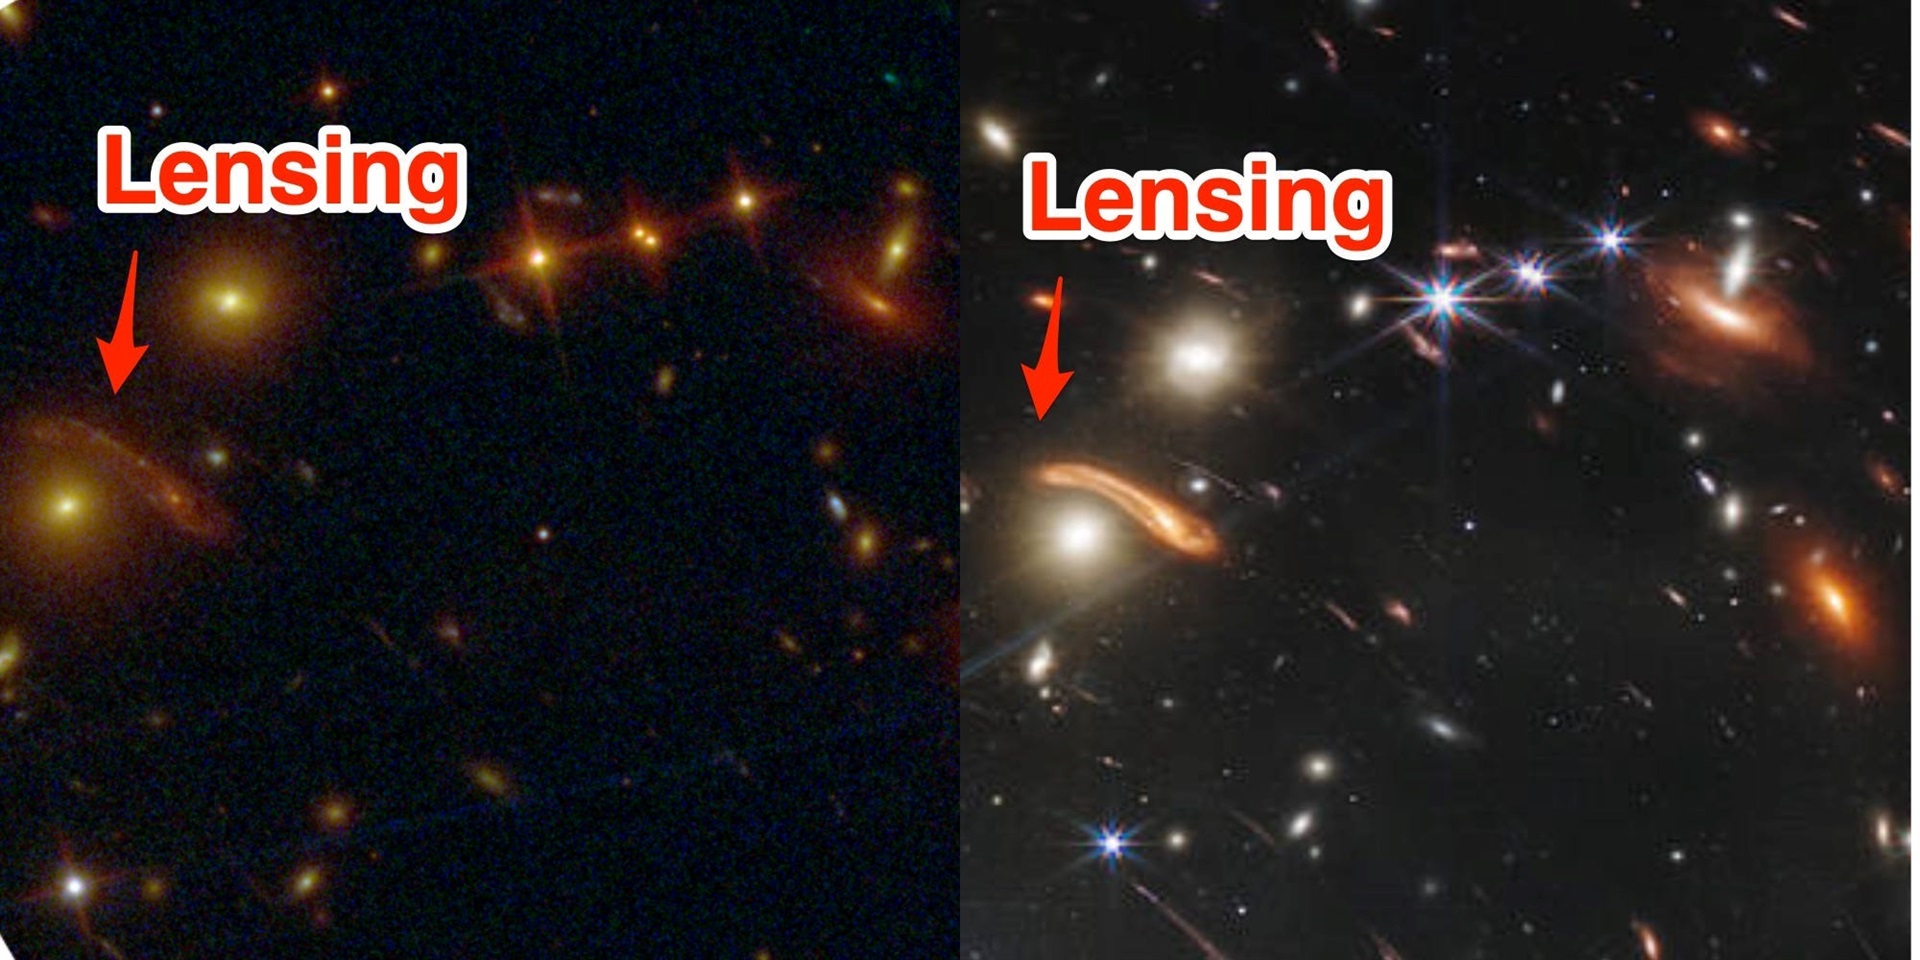 Lensing is seen in this area. Hubble space telescope picture is shown on the left, JWST picture on the right.